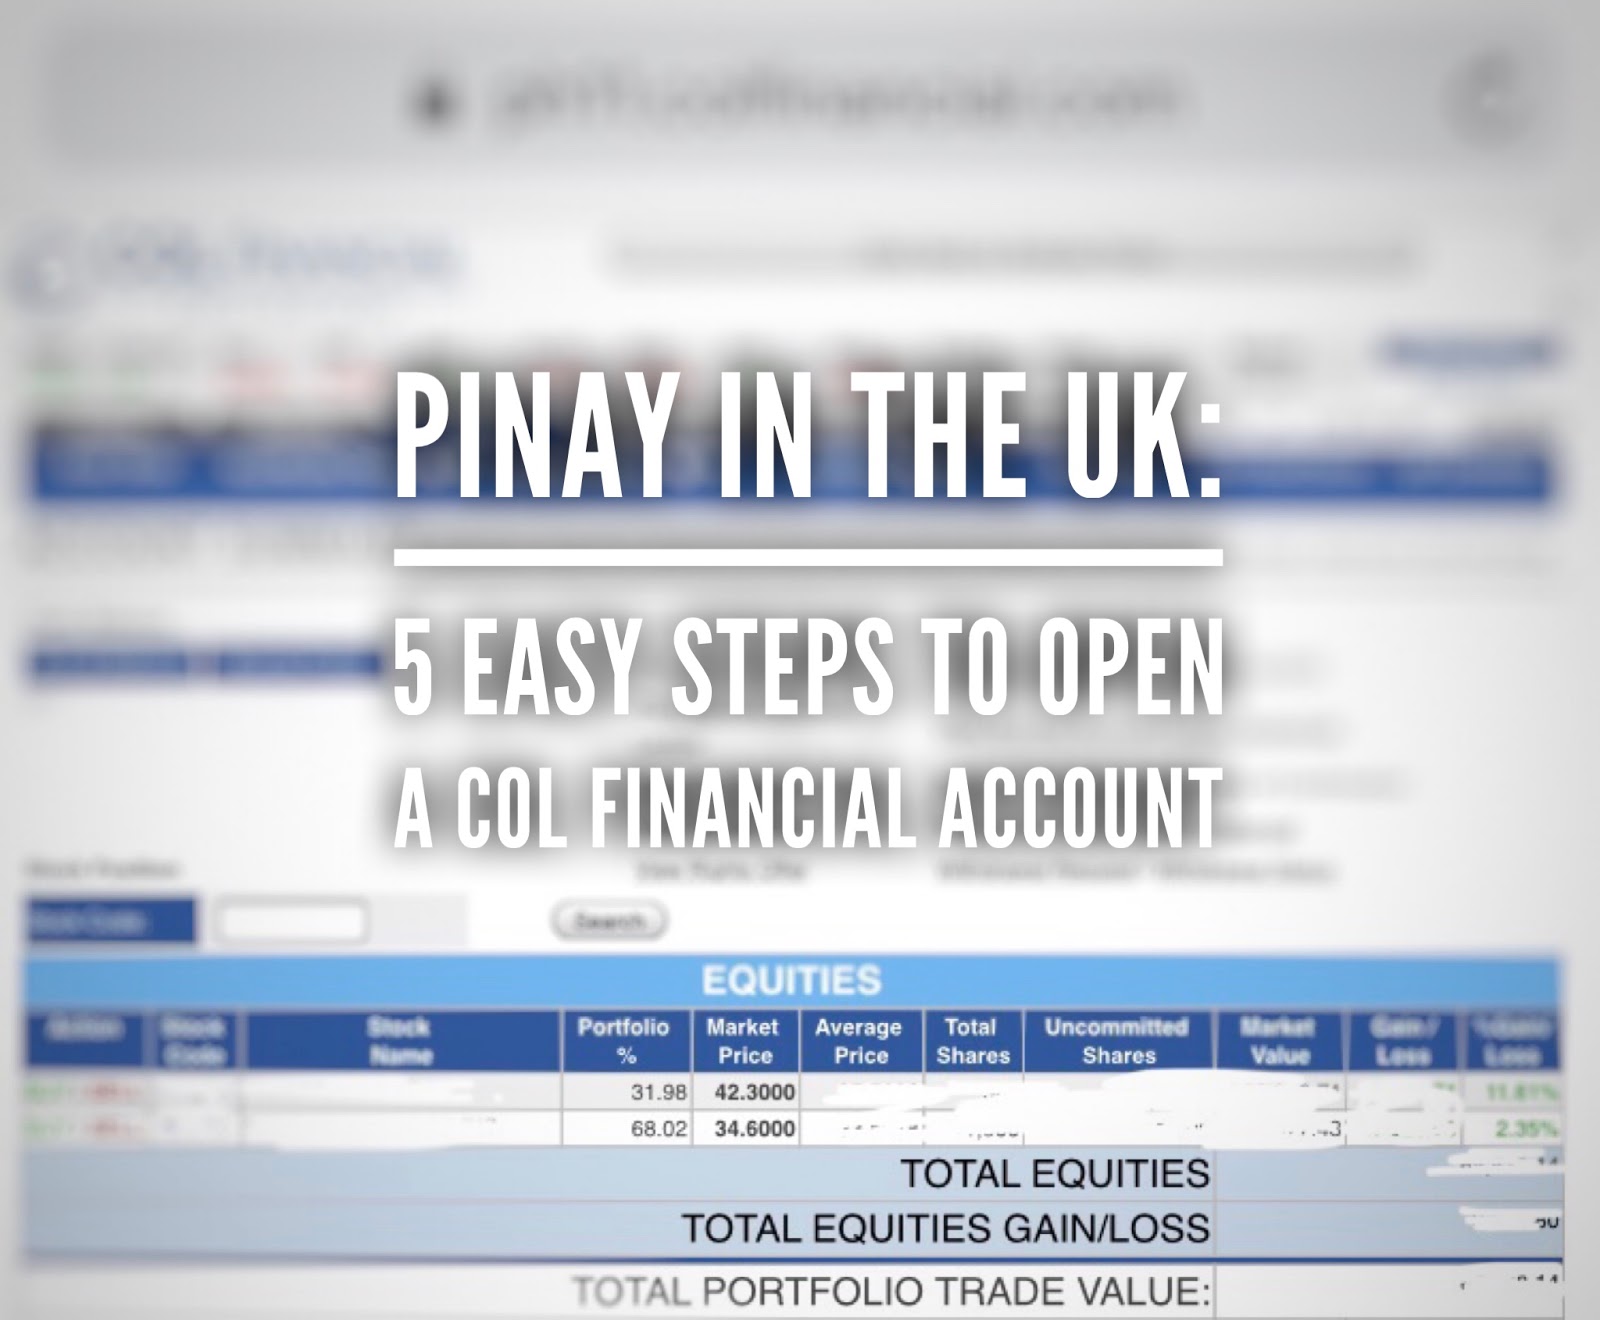 Pinay in the UK: 5 Easy Steps to Open a COL Financial Account